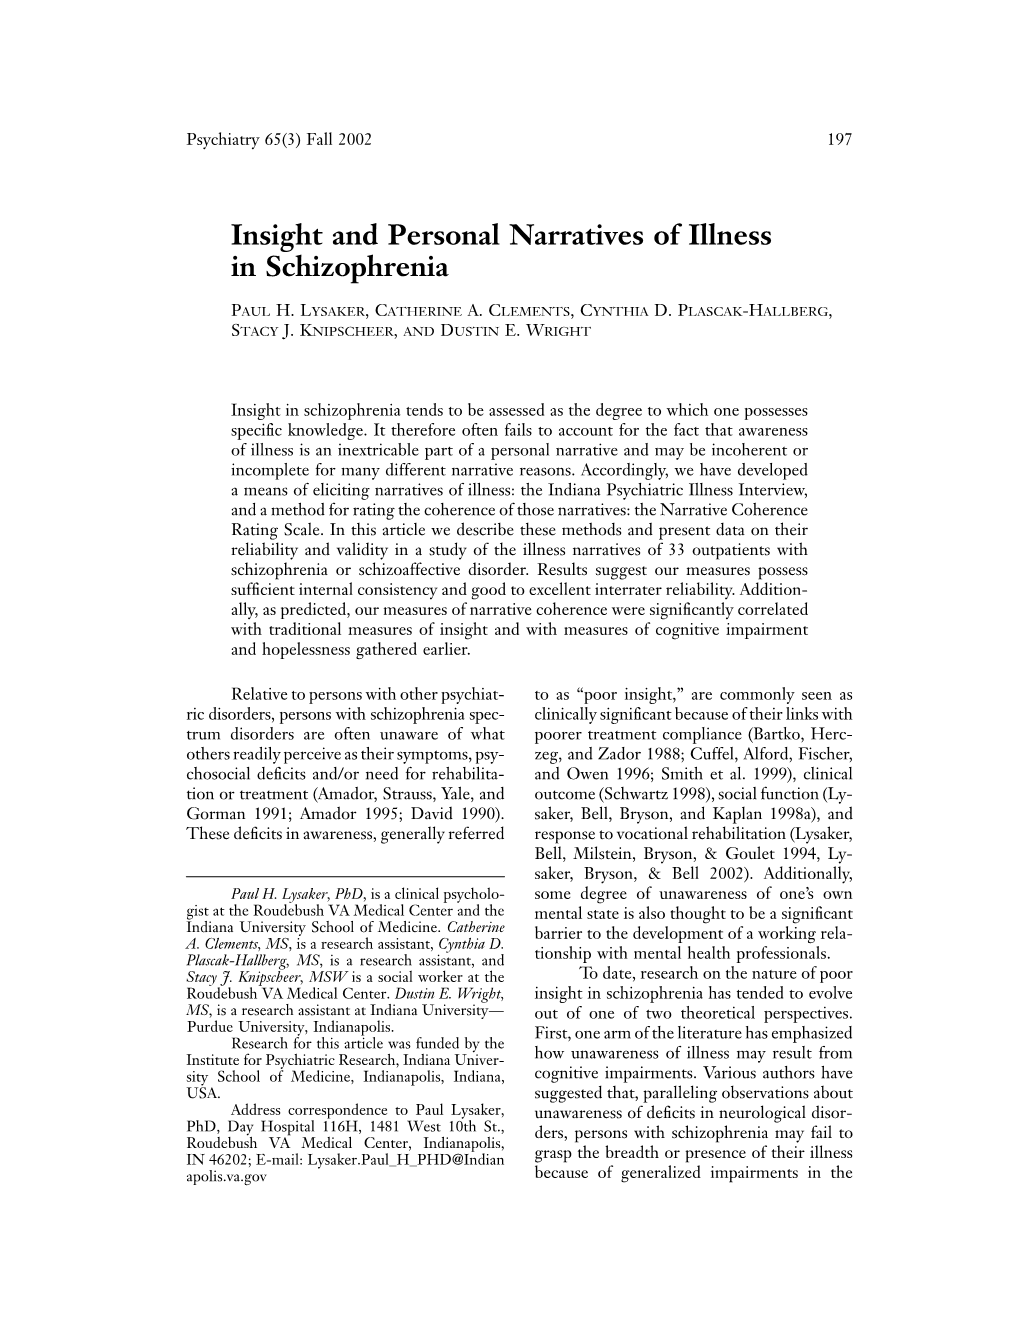 Insight and Personal Narratives of Illness in Schizophrenia